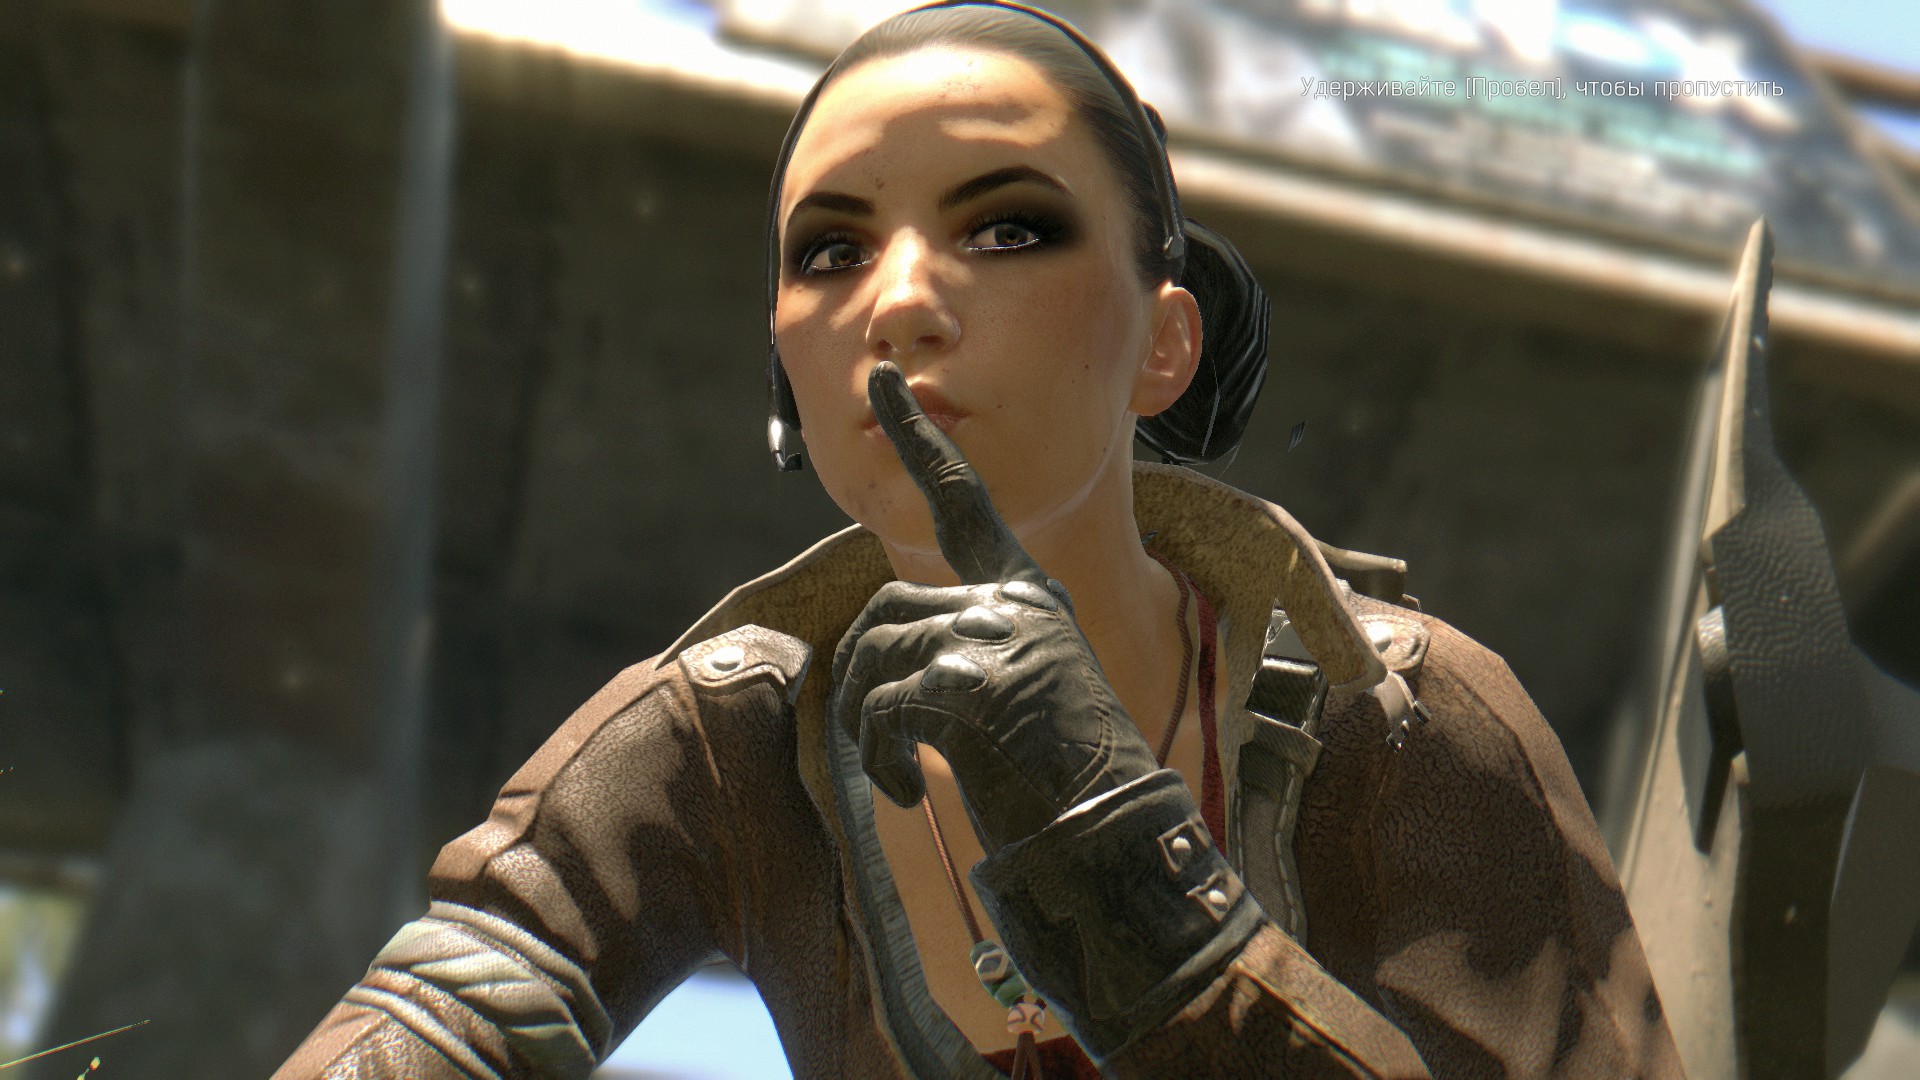 Gallery of Dying Light Mods Female.